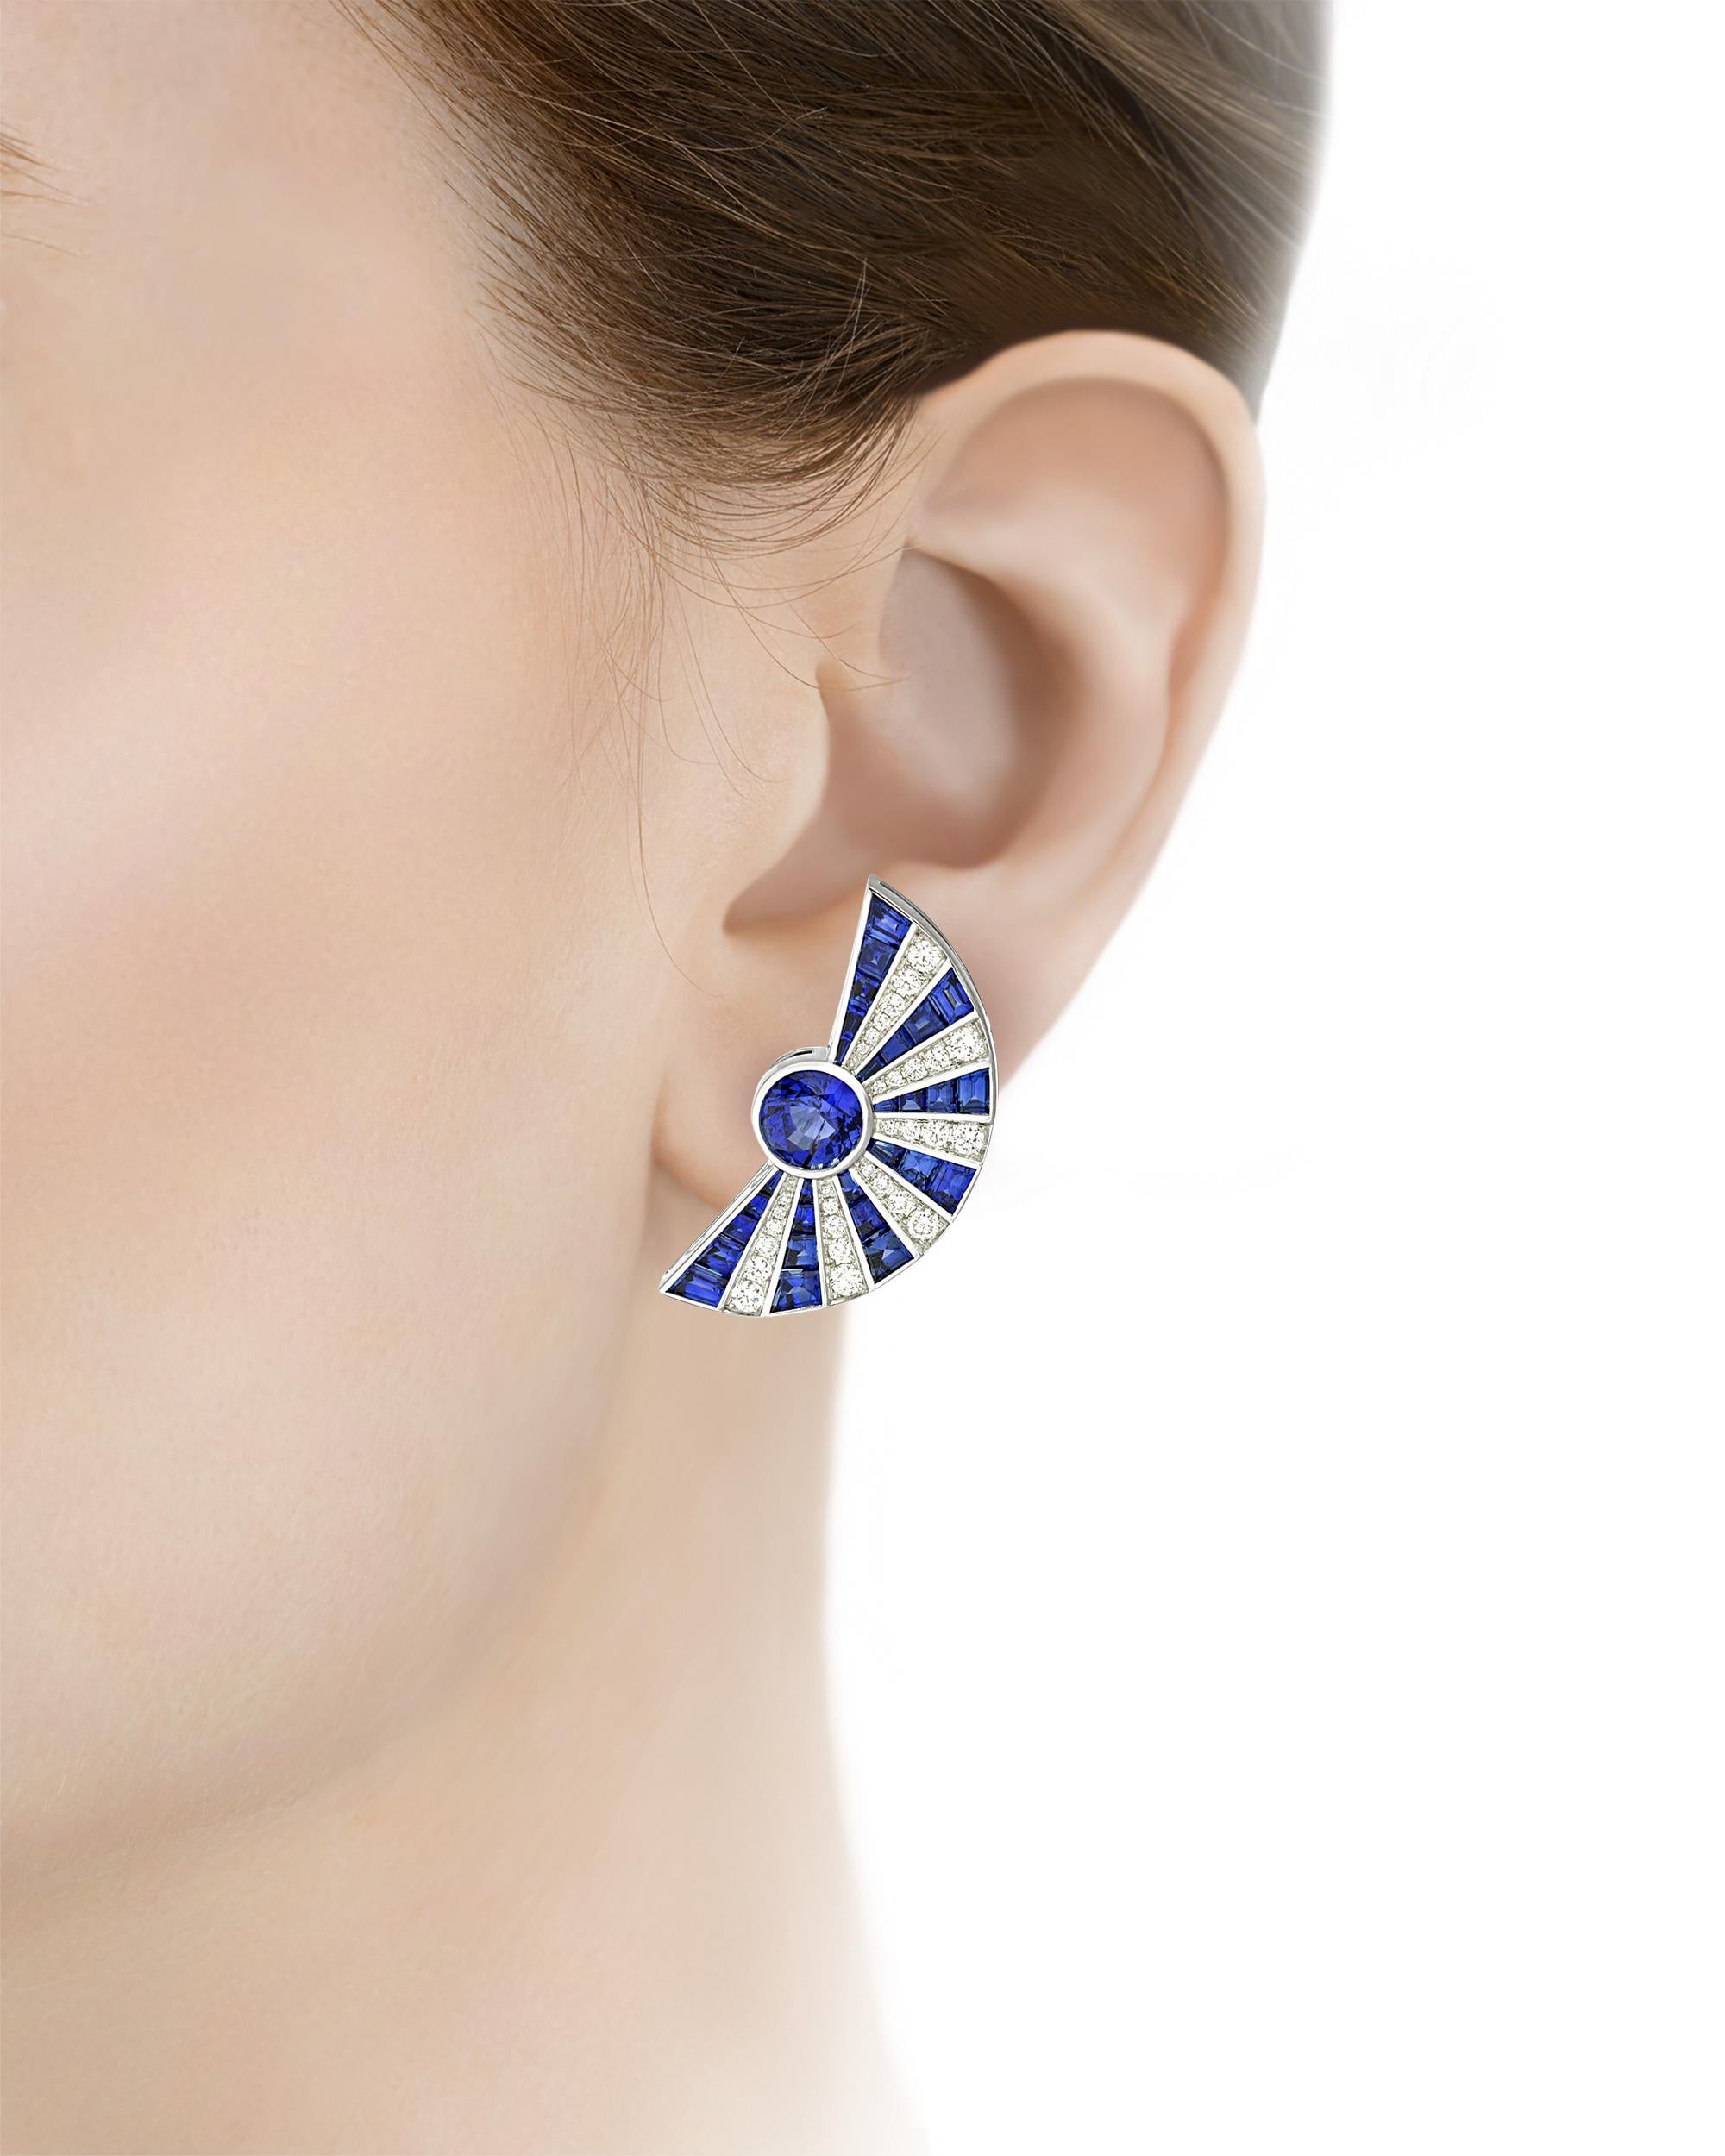 Radiating lines of deep blue sapphires totaling 7.33 carats and sparkling white diamonds totaling 0.80 carat resemble starbursts in these dramatic fan earrings. Set in 18K white gold.